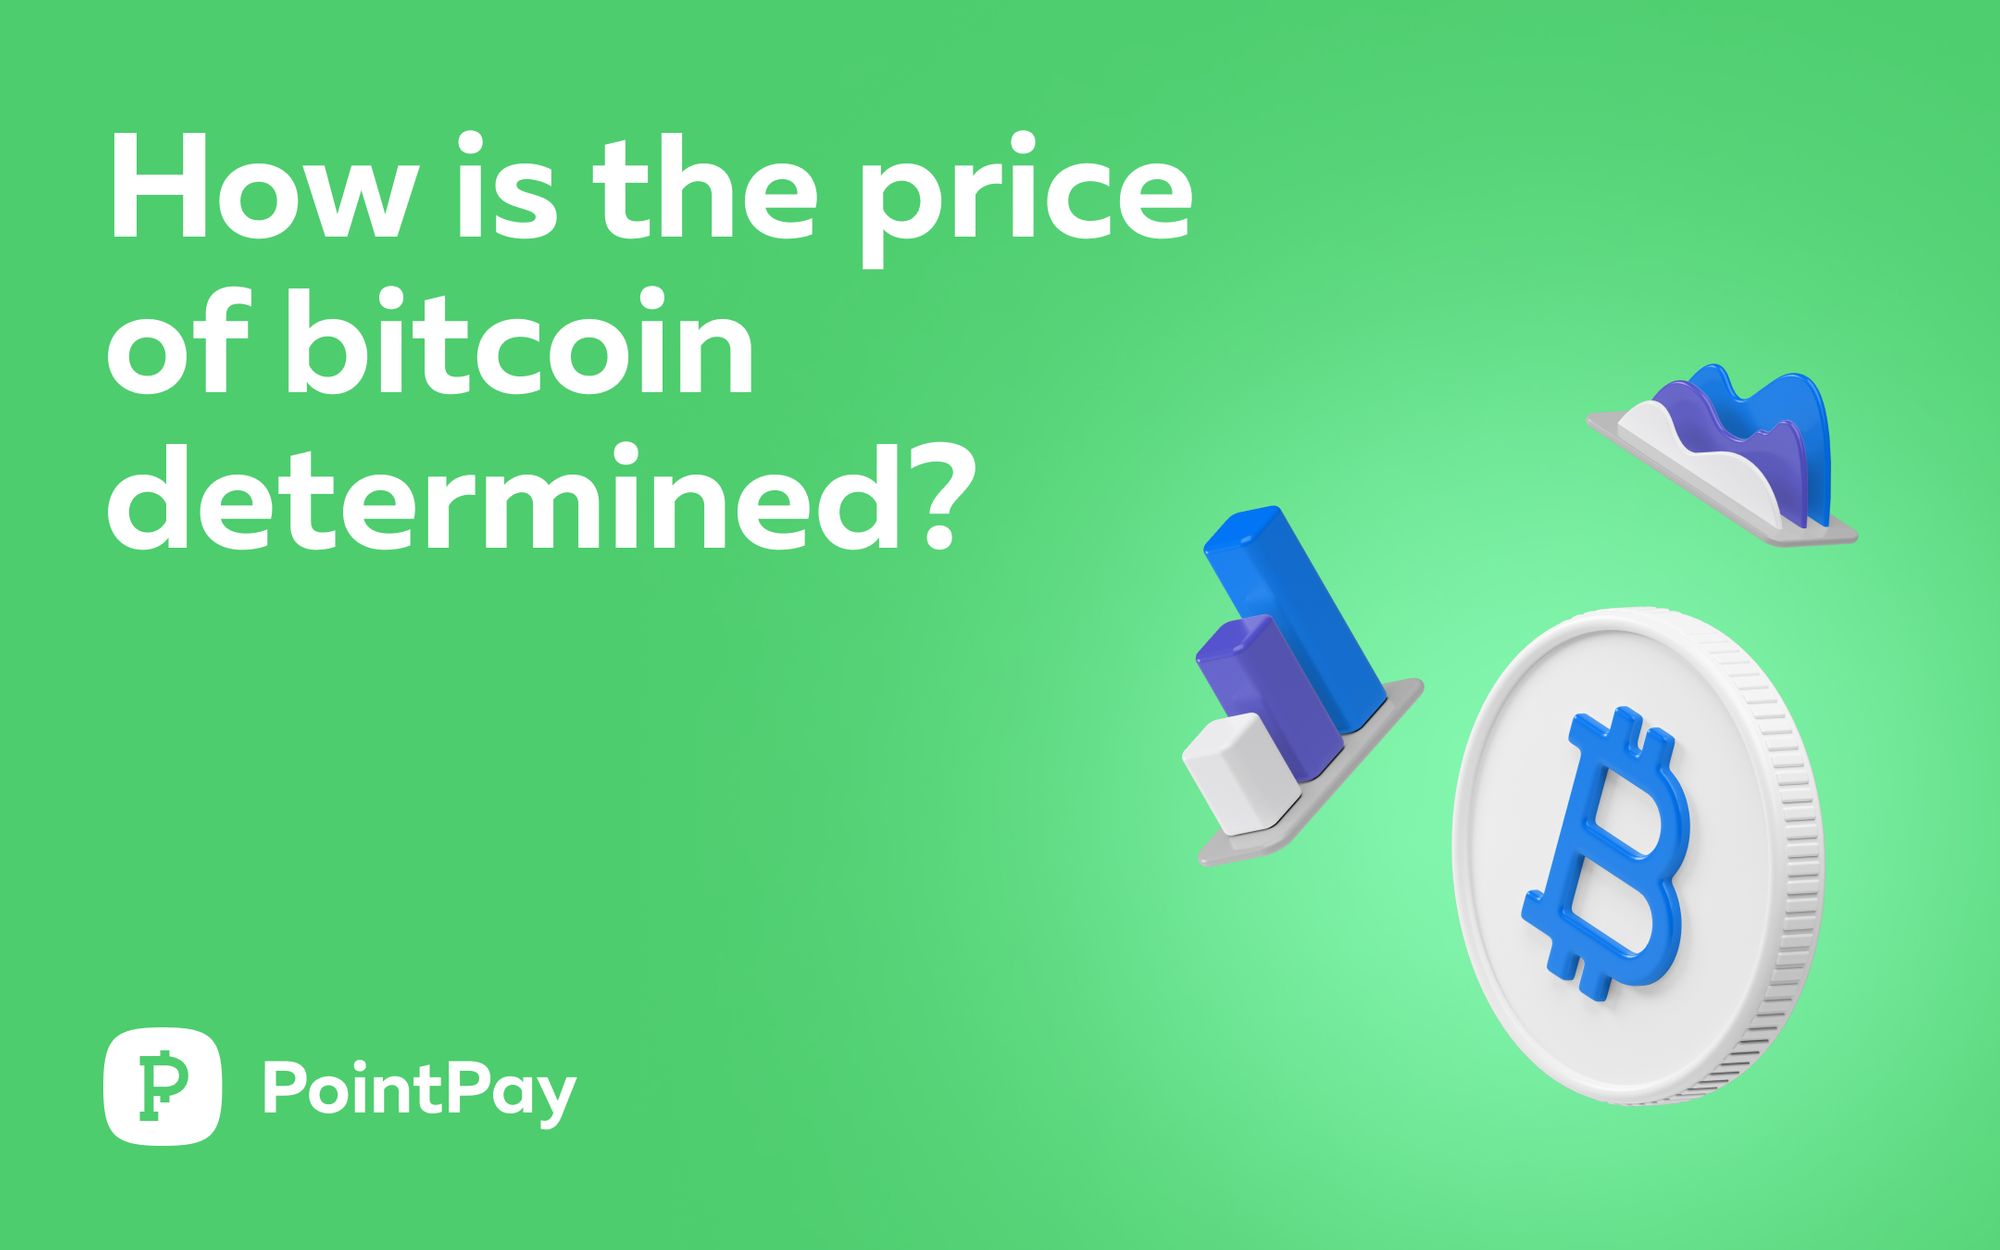 How is the price of bitcoin determined?